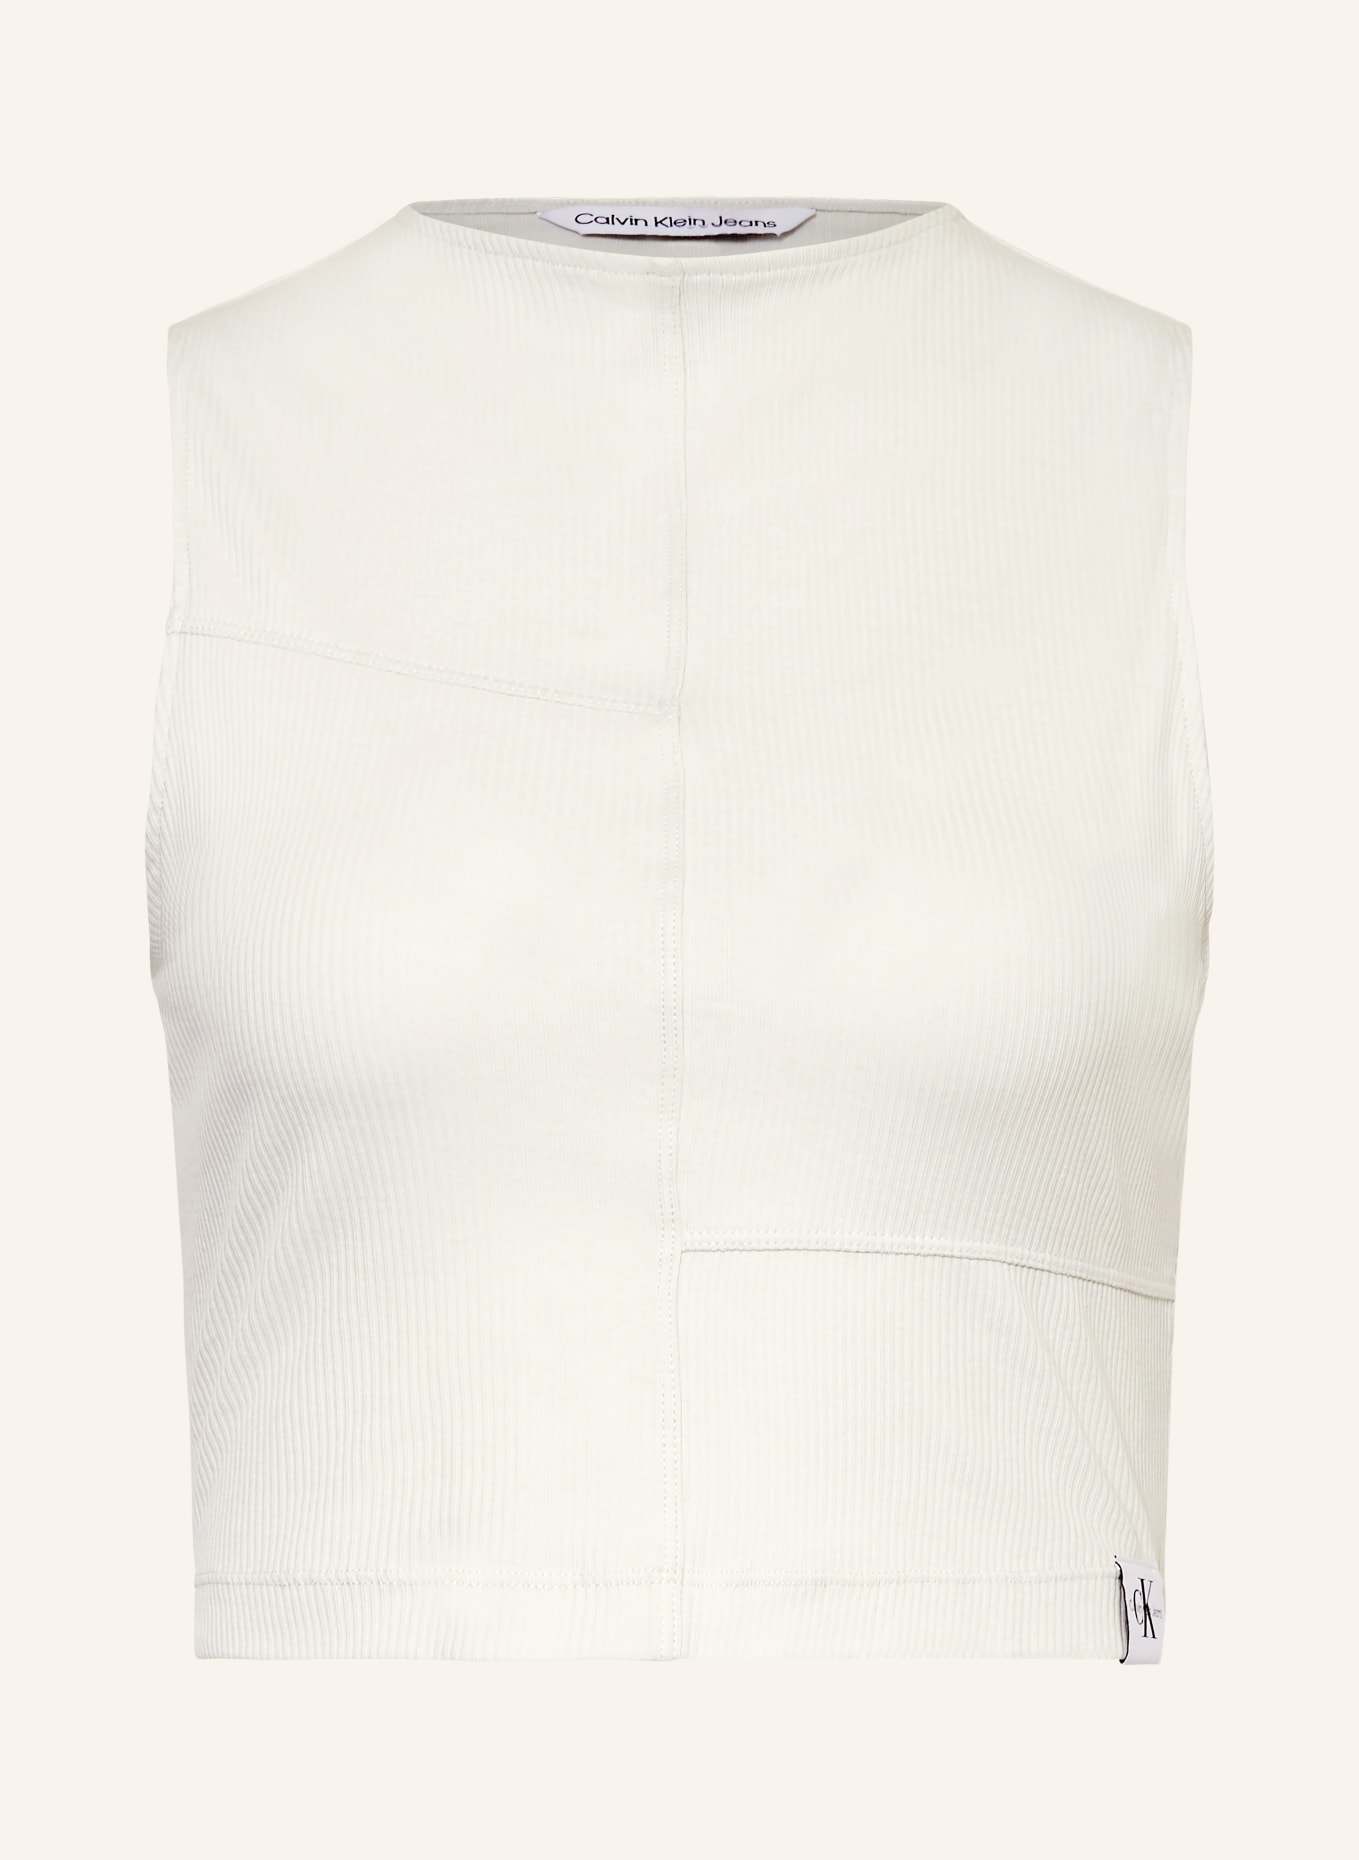 Calvin Klein Jeans Cropped top, Color: WHITE (Image 1)